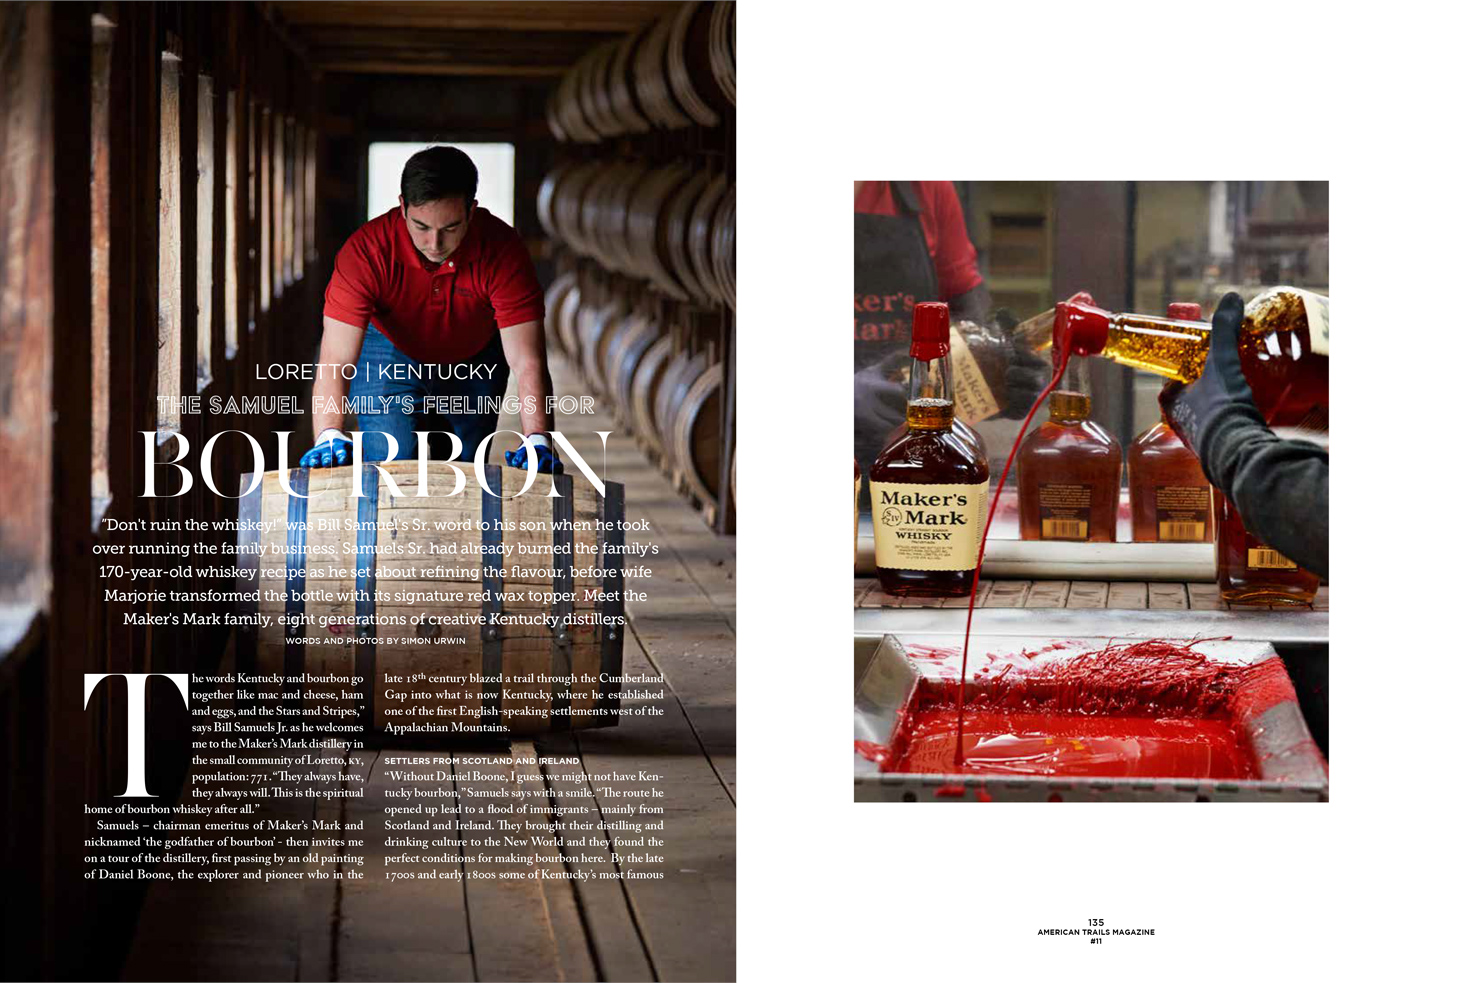 bourbon-whiskey-distillery-travel-photography-article-in-american-trails-magazine-by-simon-urwin-in-kentucky-usa